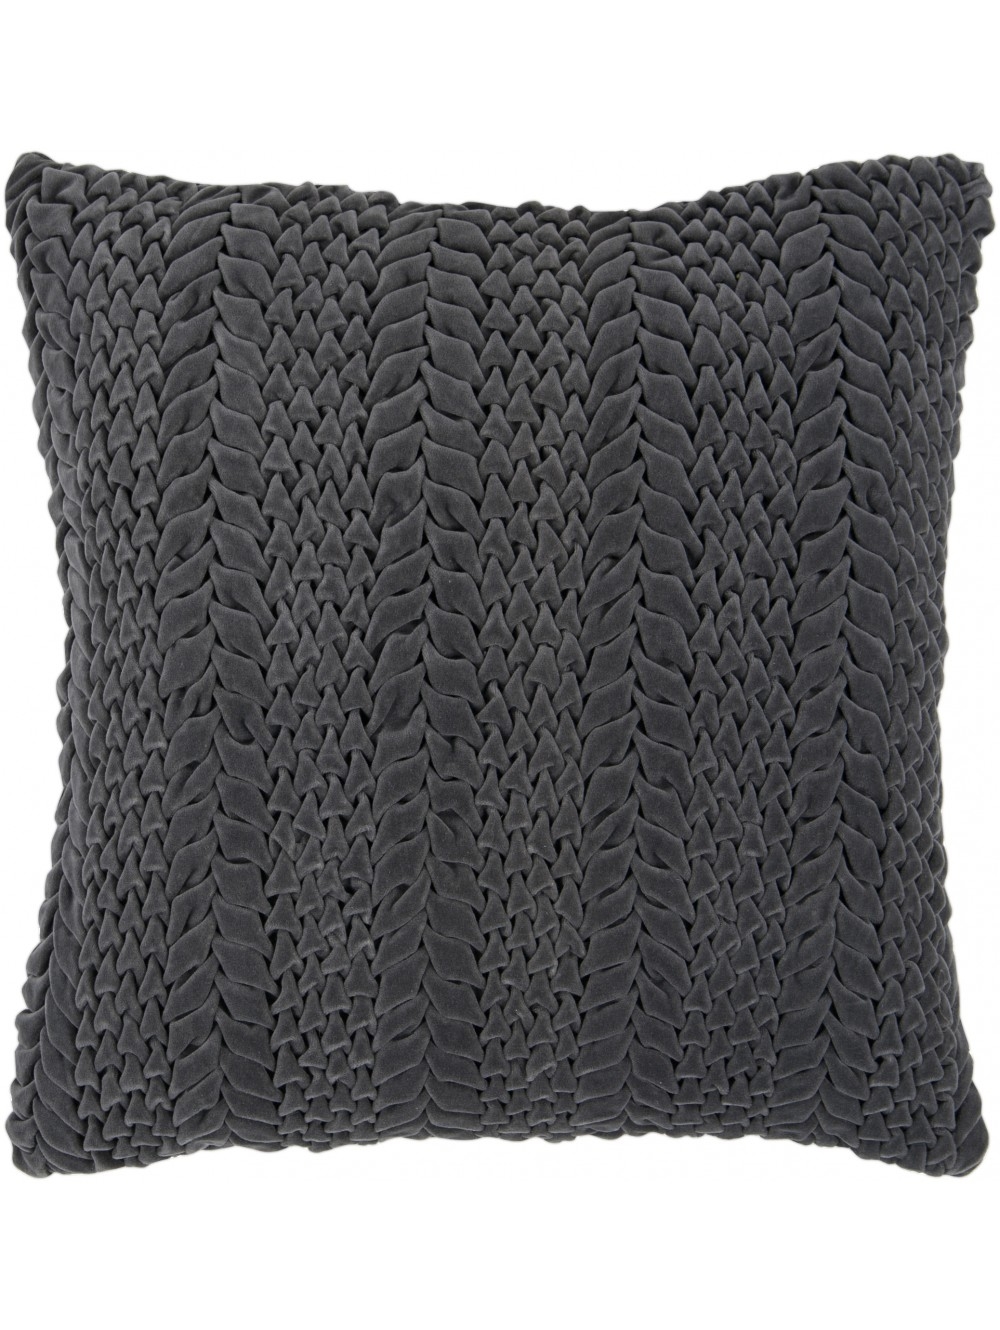 Verna Pillow - Charcoal - 18" x 18" - Polyester Filled - Image 0